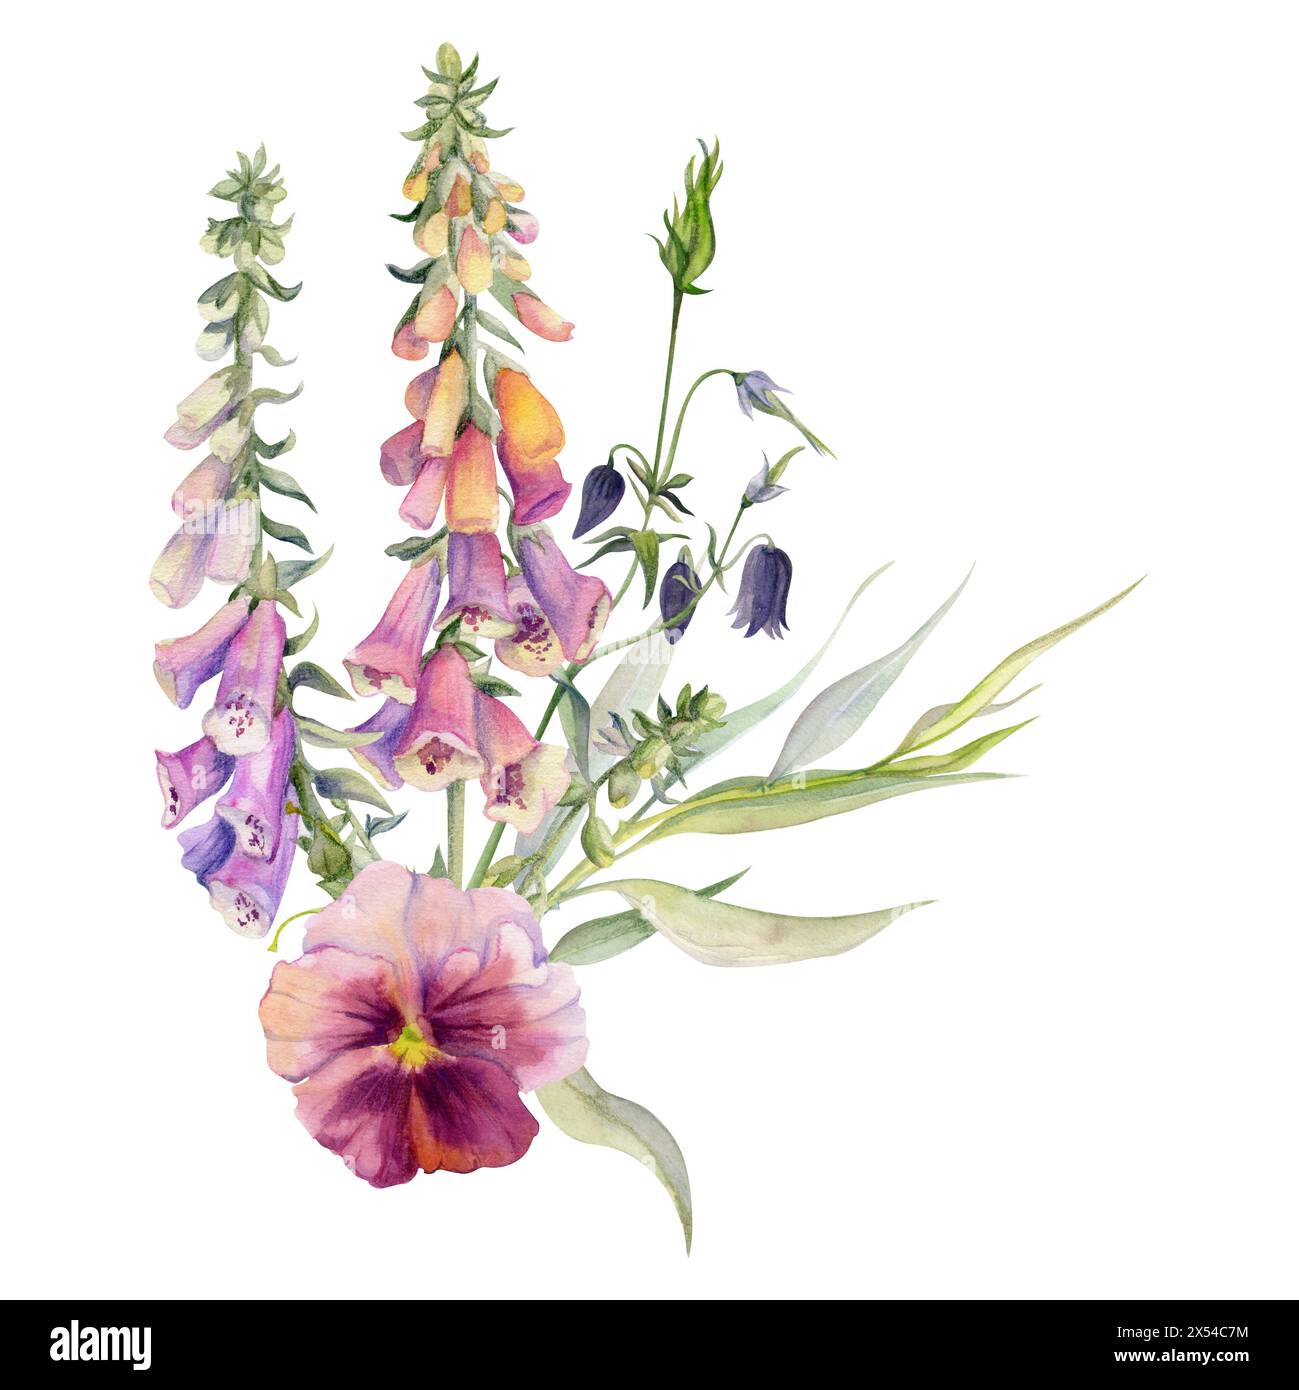 Hand drawn watercolor illustration botanical flowers leaves. Foxglove snapdragon lupin, mauve pansy viola, willow eucalyptus branches, columbine Stock Photo